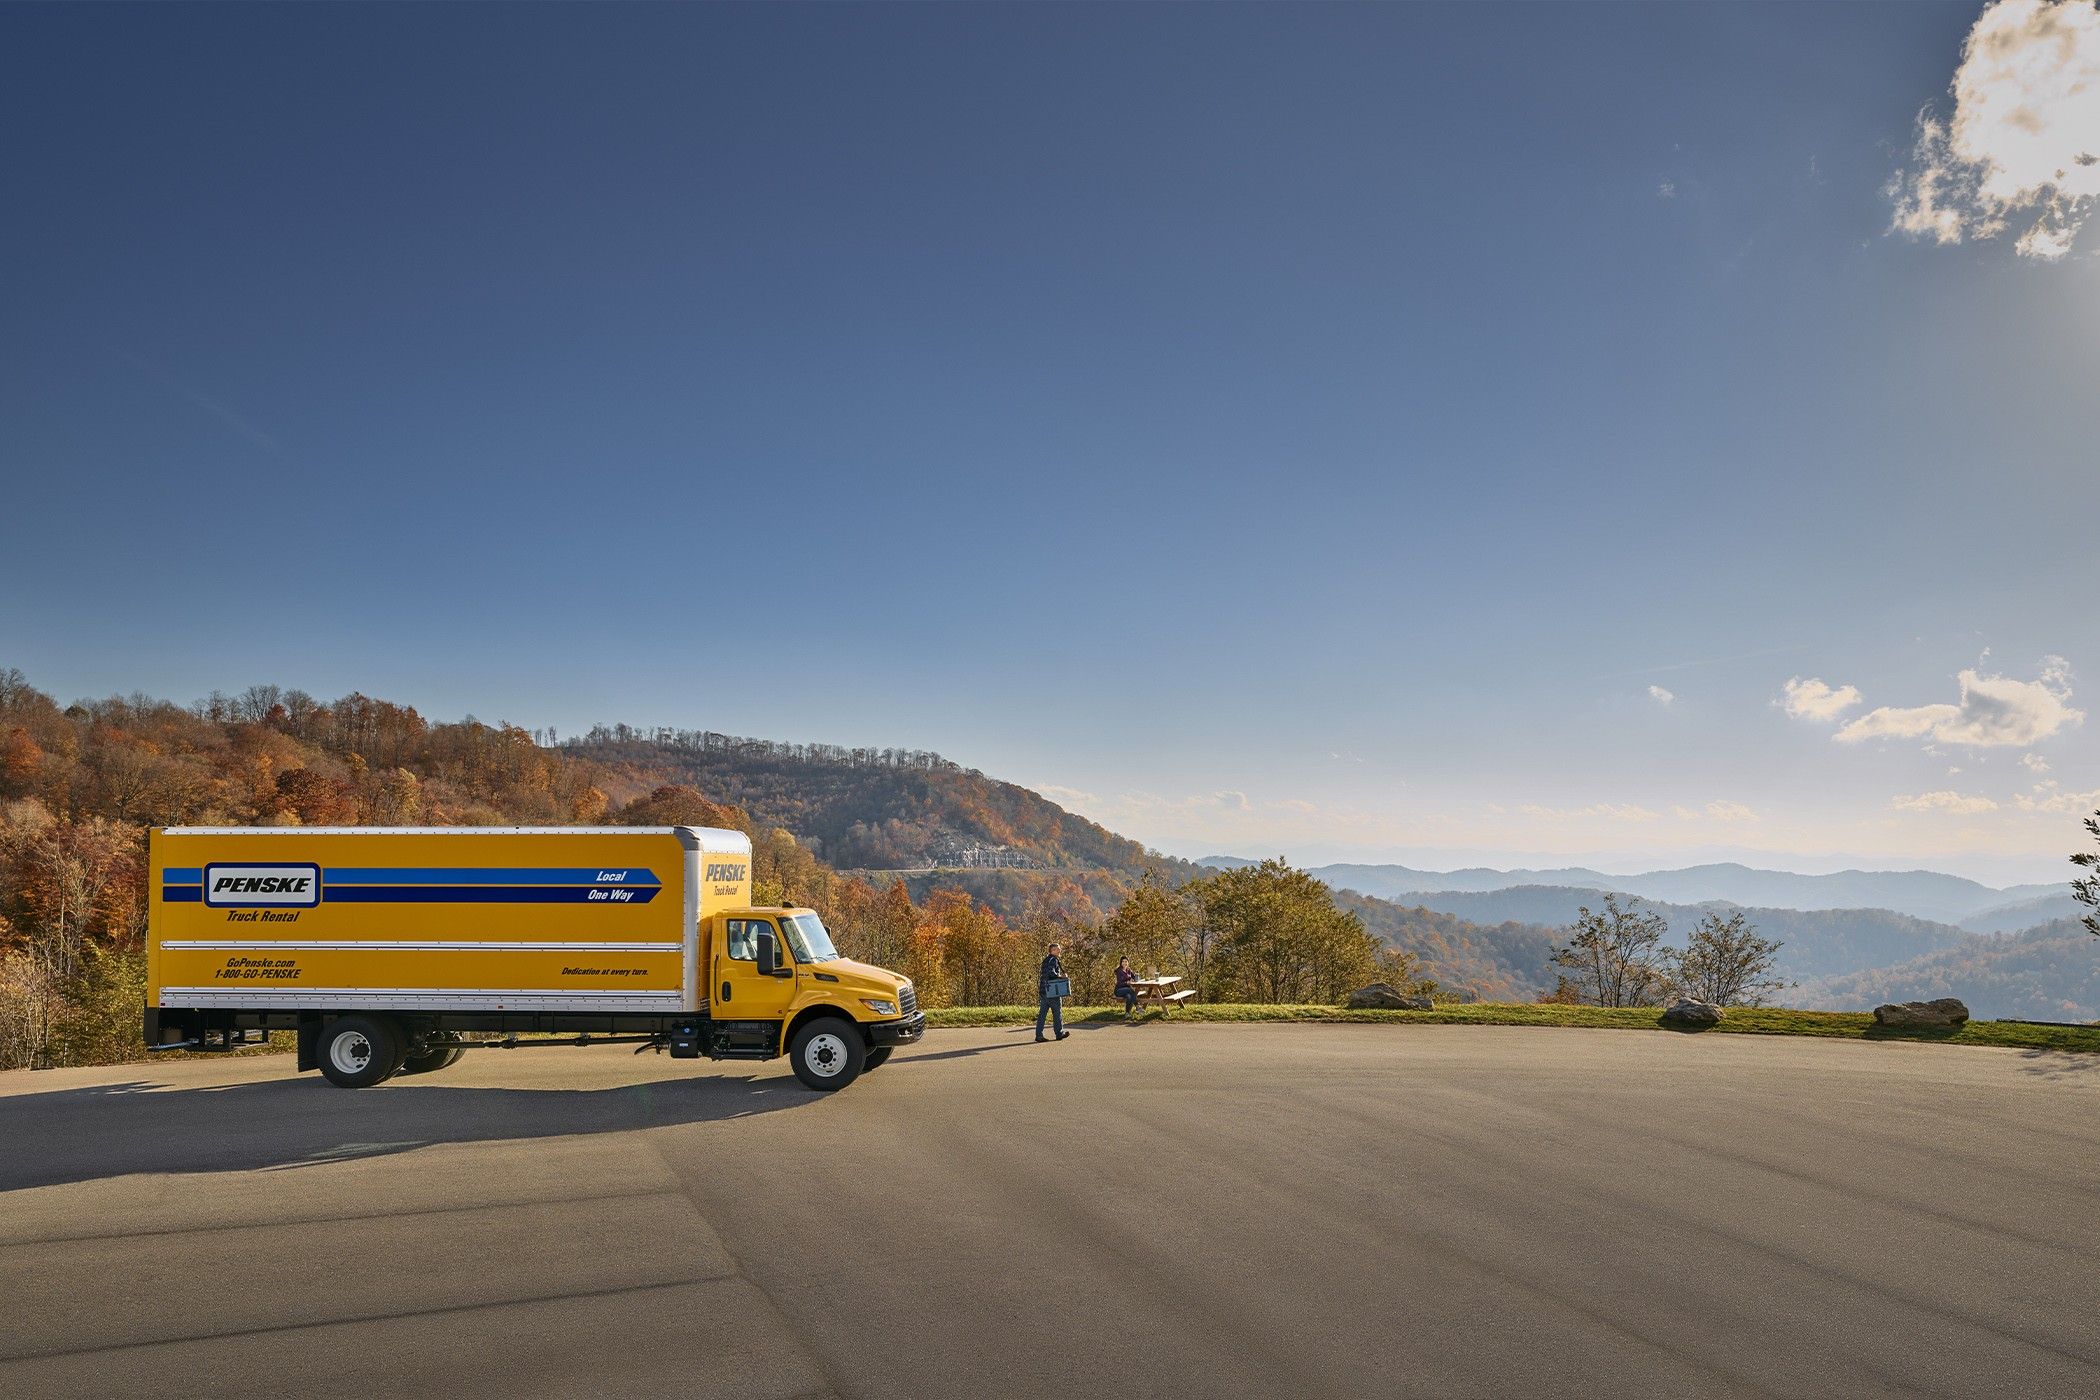 A parked yellow Penske truck in the mountains.